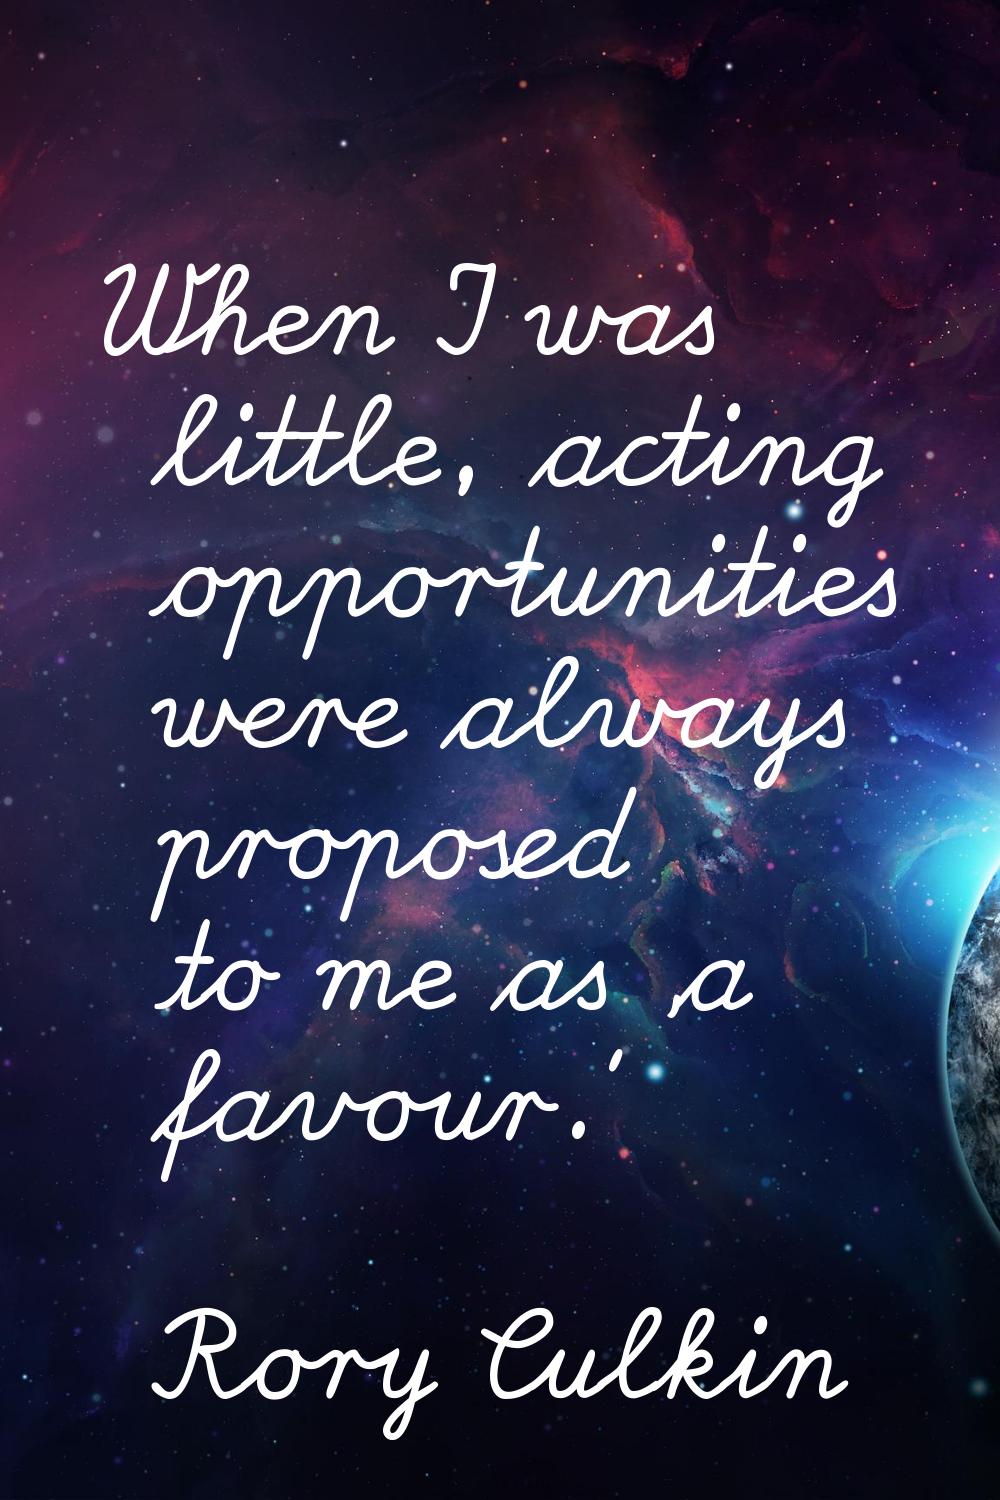 When I was little, acting opportunities were always proposed to me as 'a favour.'